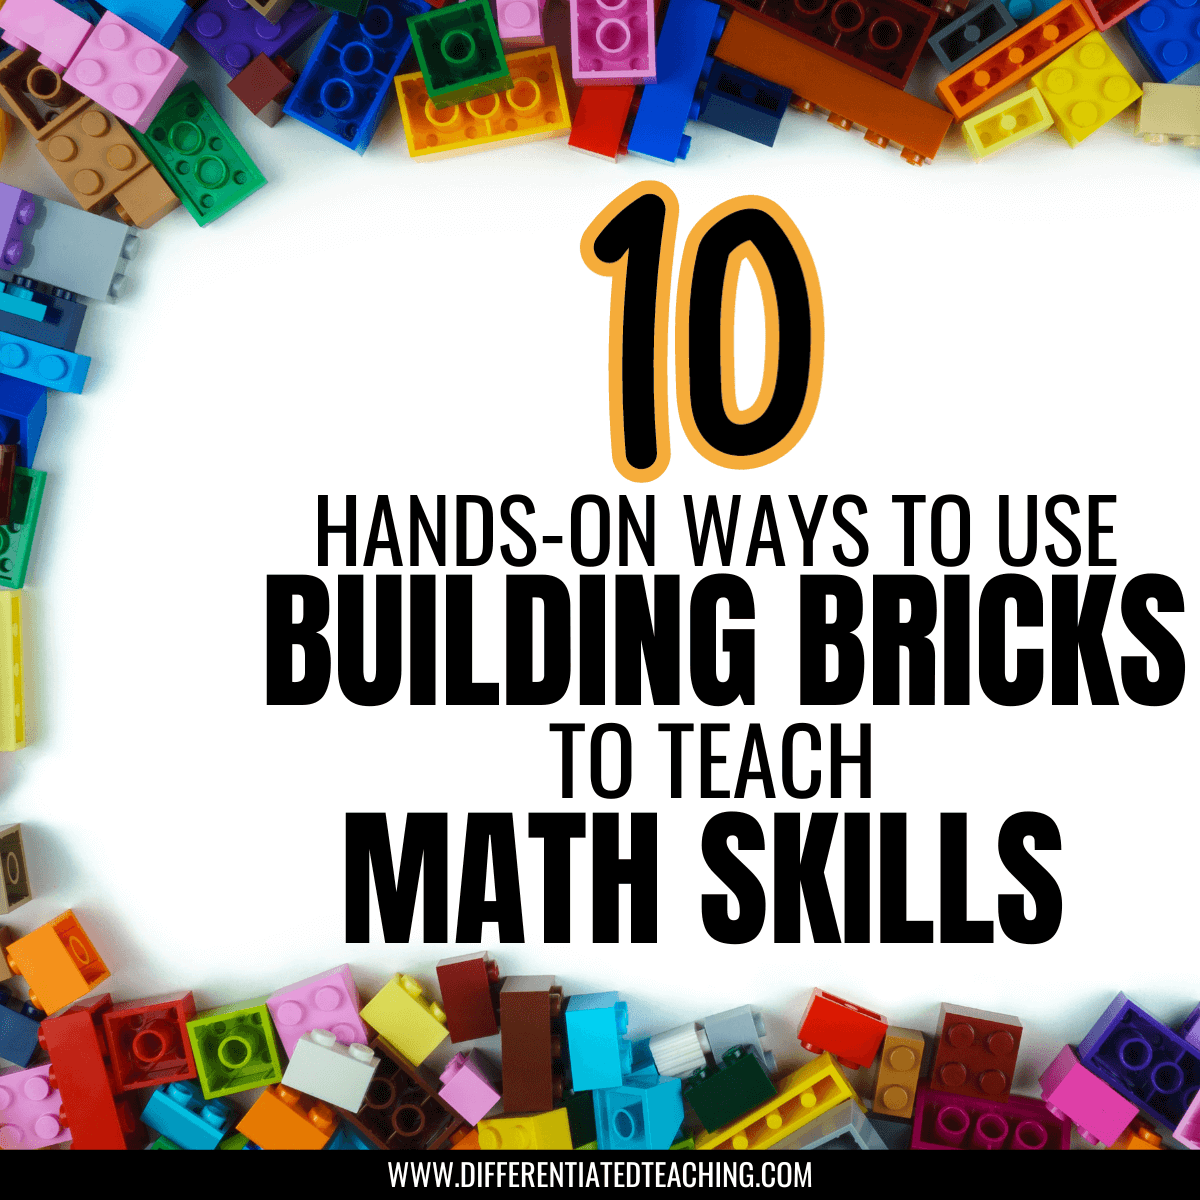 10 Engaging Ways to Use Building Bricks for Hands-On Math Practice